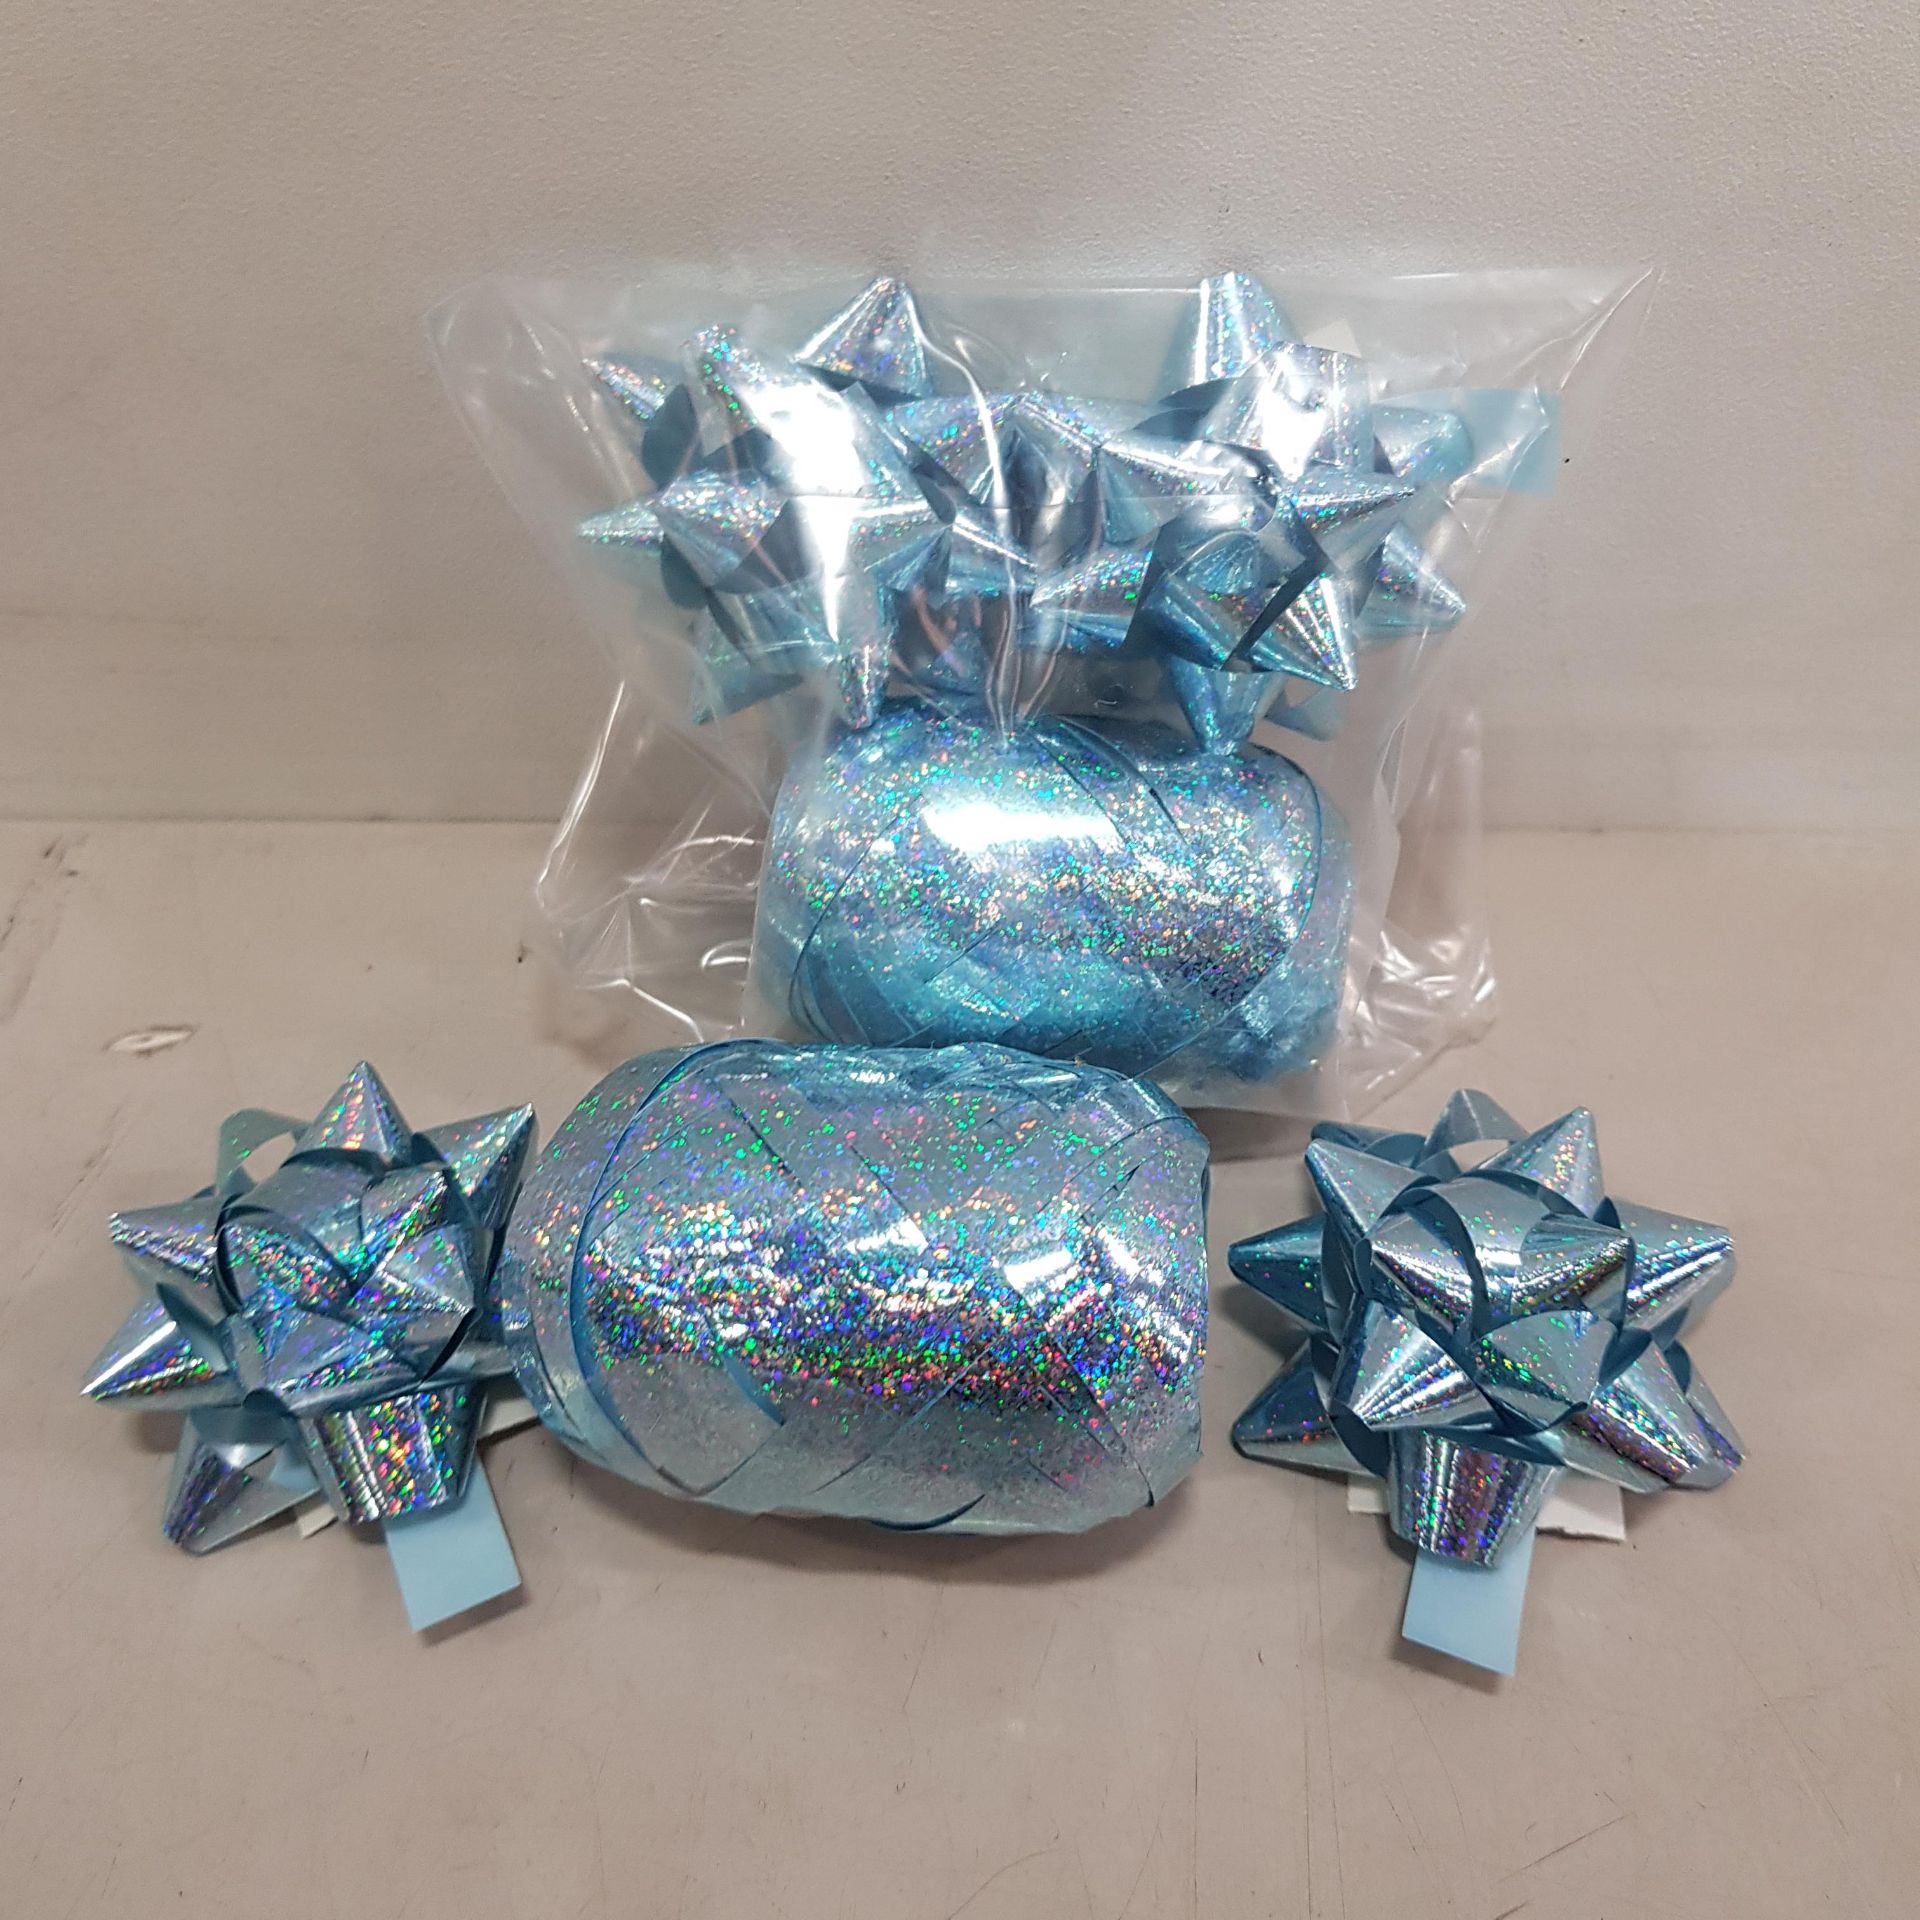 800 + BRAND NEW GIFT DECORATION TO INCLUDE 2 BOWS AND 1 STRING - IN BLUE